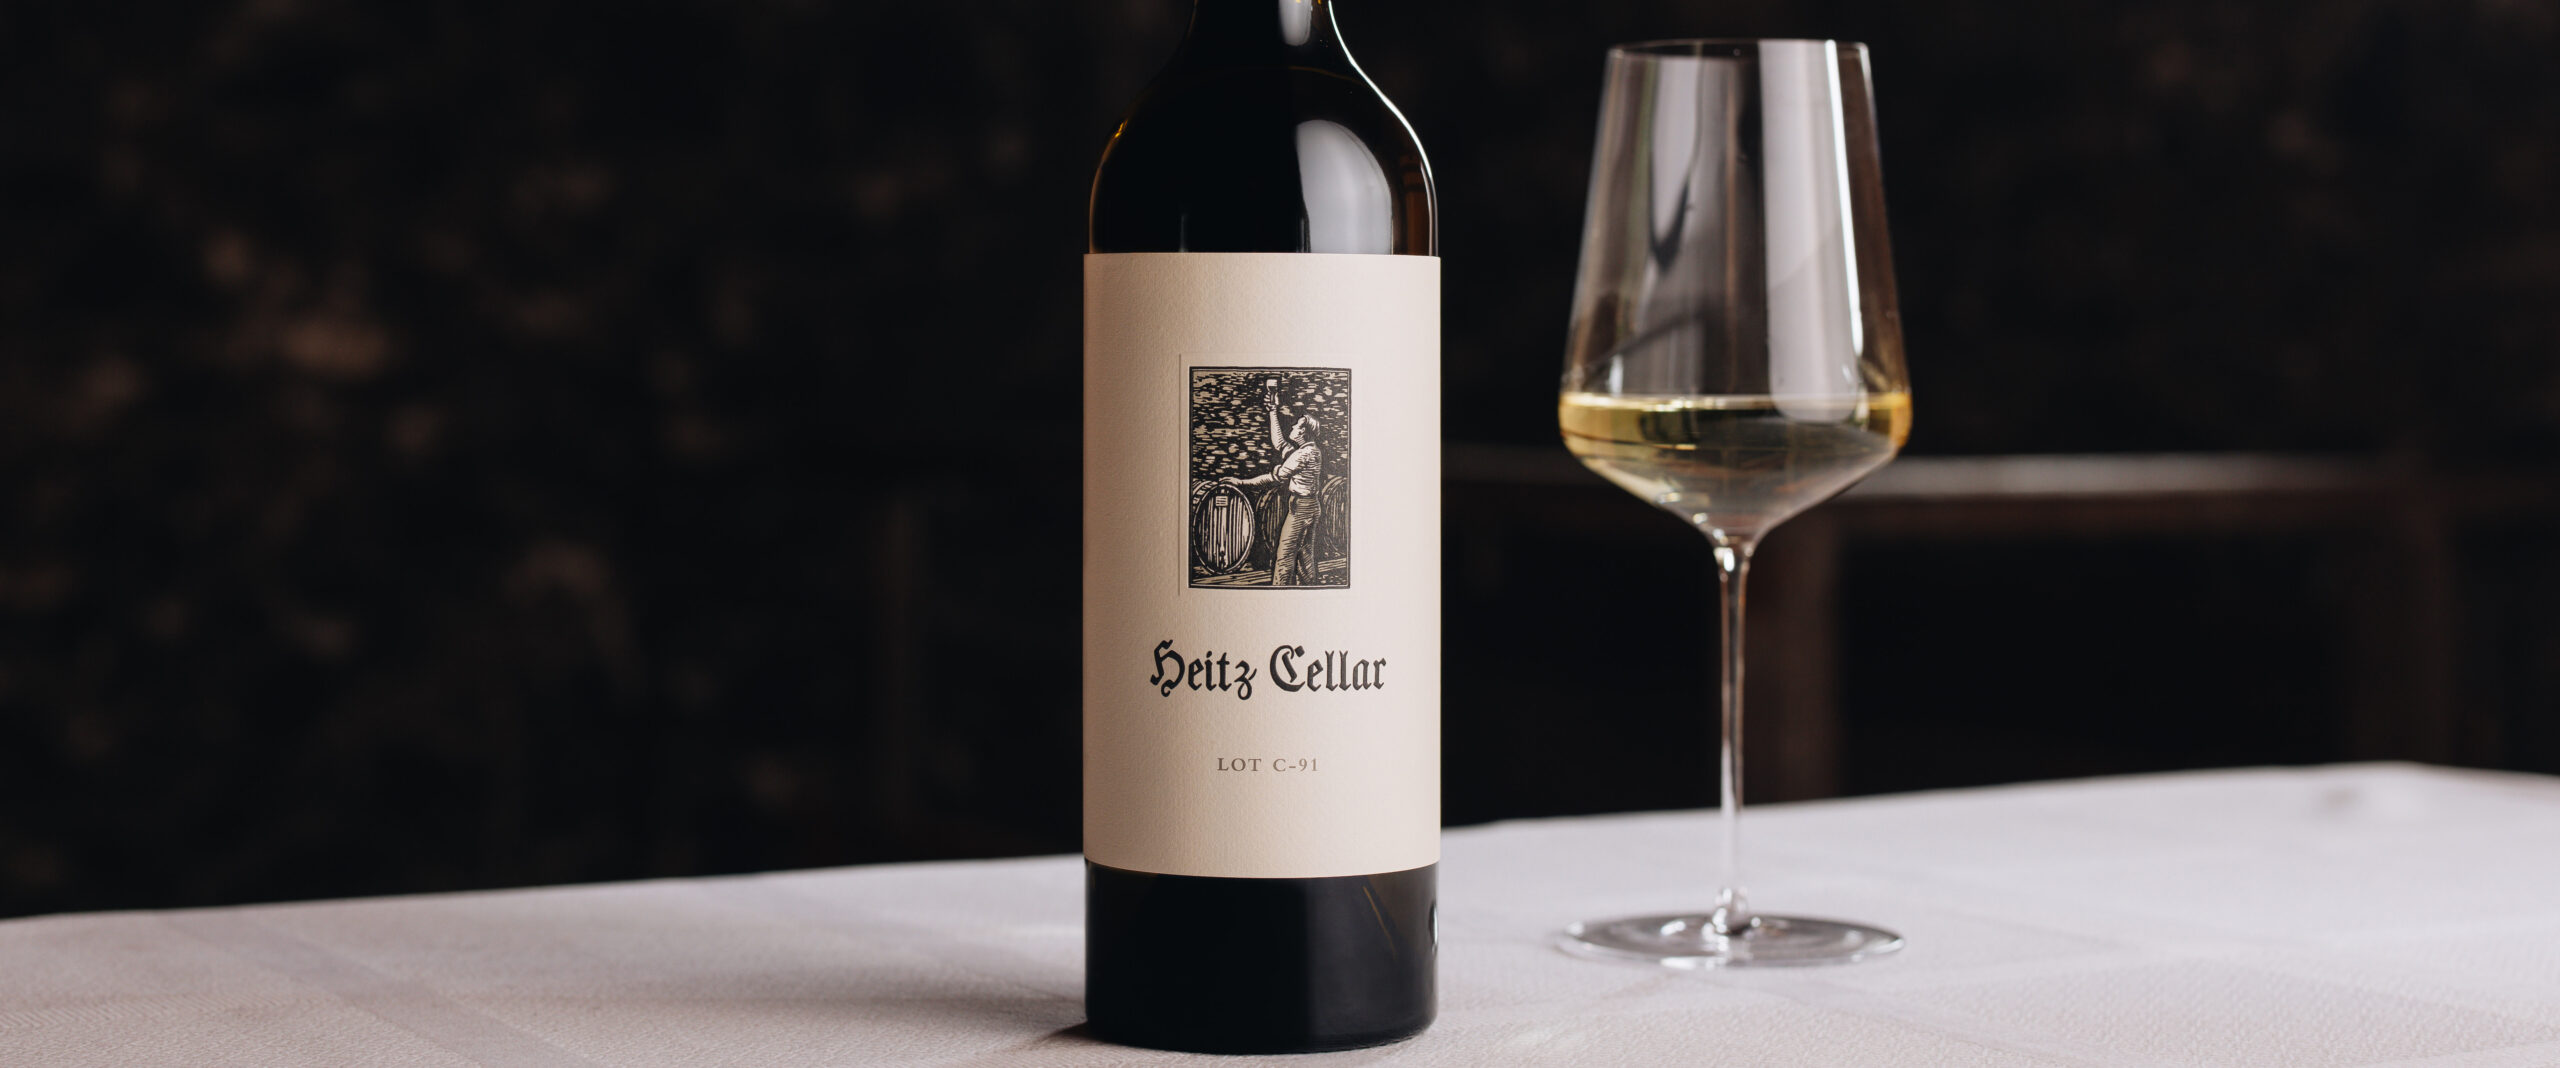 A bottle of Heitz Cellar Lot C-91 Blanc de Blanc next to a glass of white wine on a table.